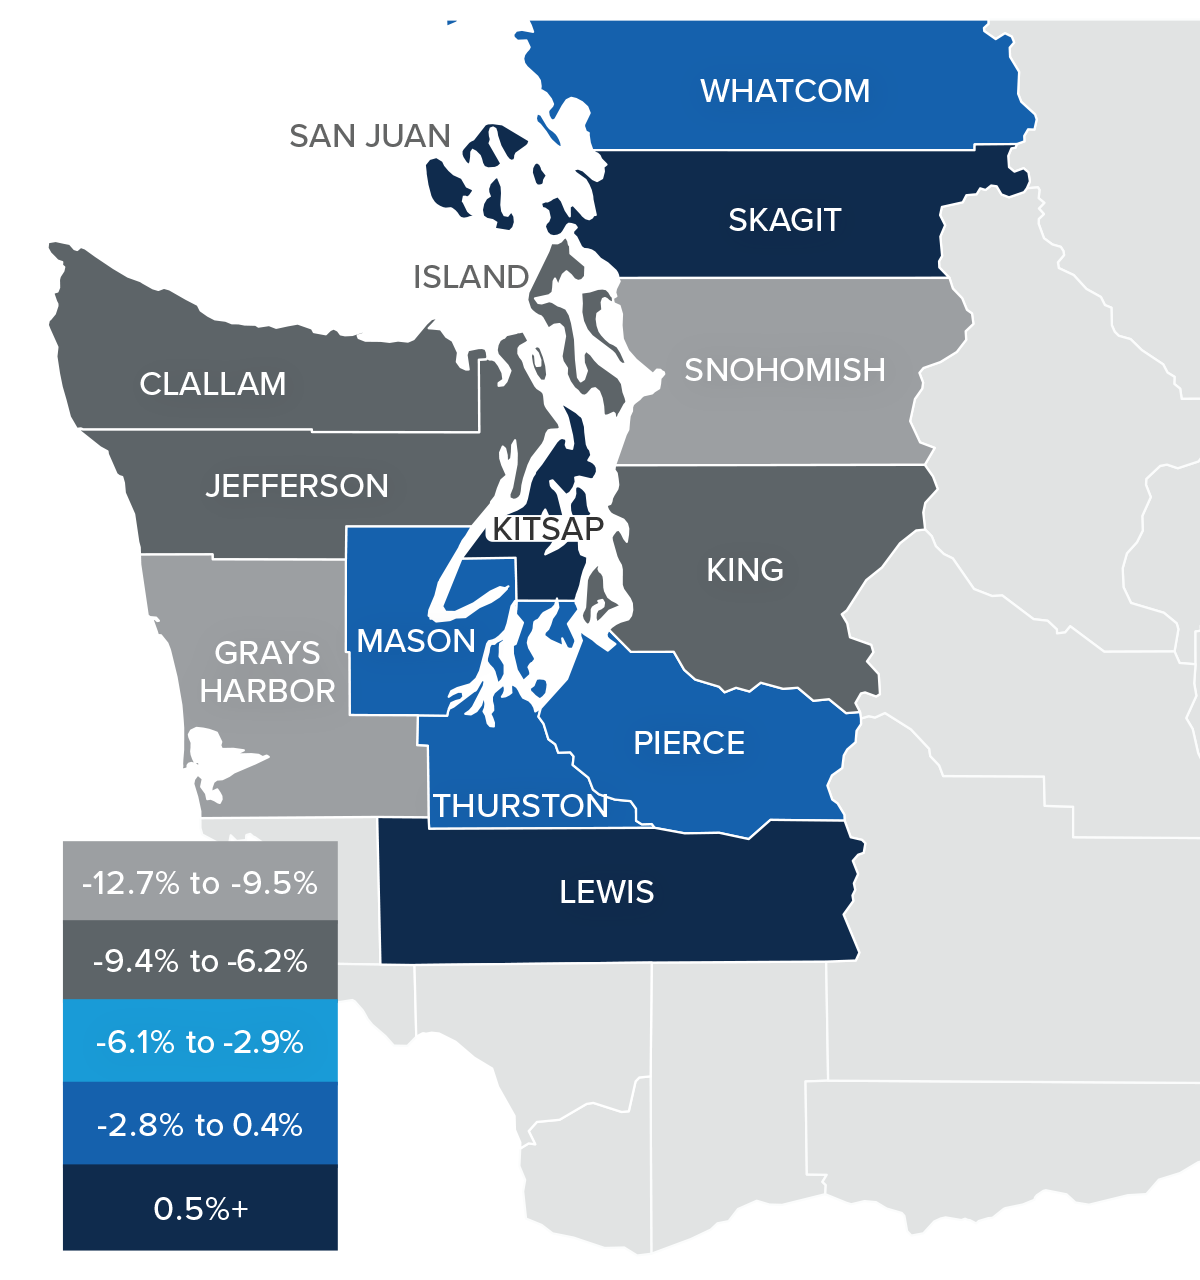 A map showing the real estate home prices percentage changes for various counties in Western Washington. Different colors correspond to different tiers of percentage change. Grays Harbor and Snohomish Counties have a percentage change in the -12.7% to -9.5% range, Clallam, Jefferson, Island, and King counties are in the -9.4% to -6.2% change range, Whatcom, Mason, Thurston, and Pierce are in the -2.8% to 0.4% change range, and Lewis, San Juan, and Skagit counties are in the 0.5%+ change range.